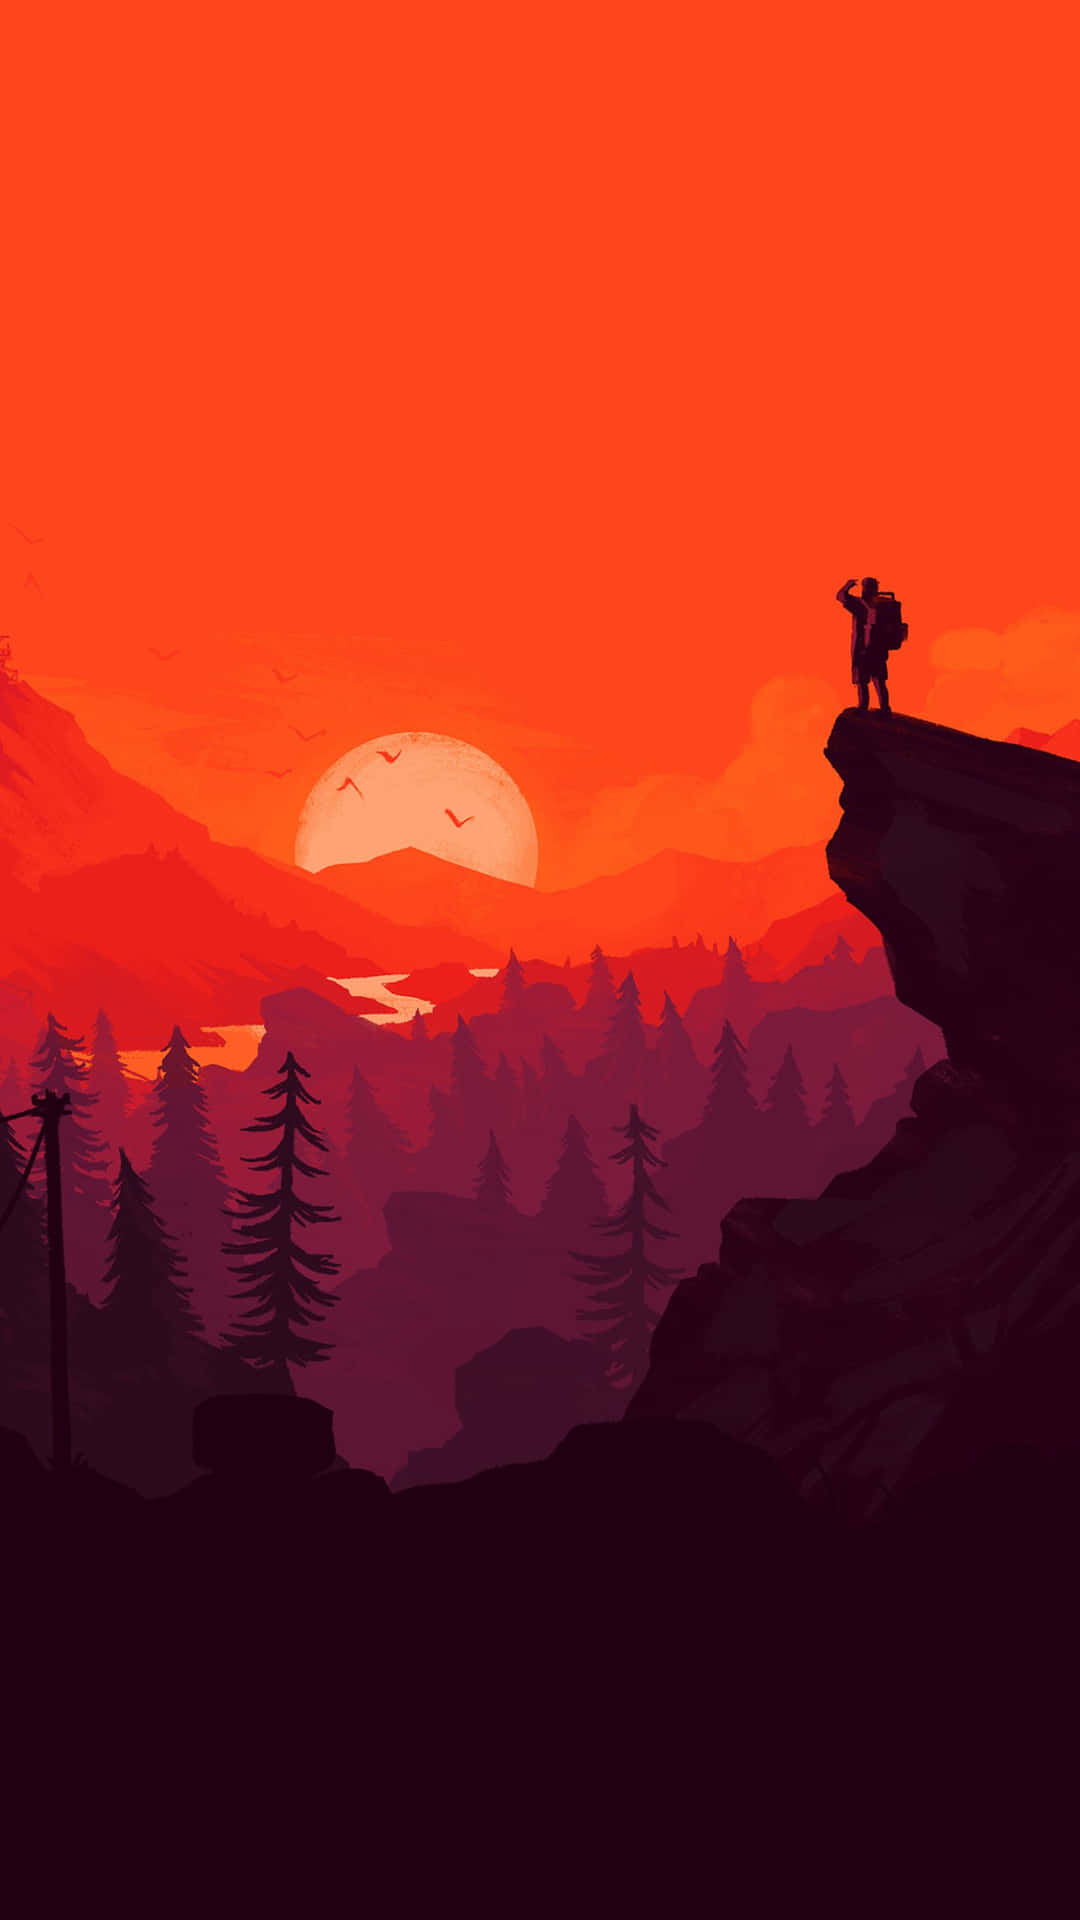 A Man Is Standing On A Cliff Overlooking The Sunset